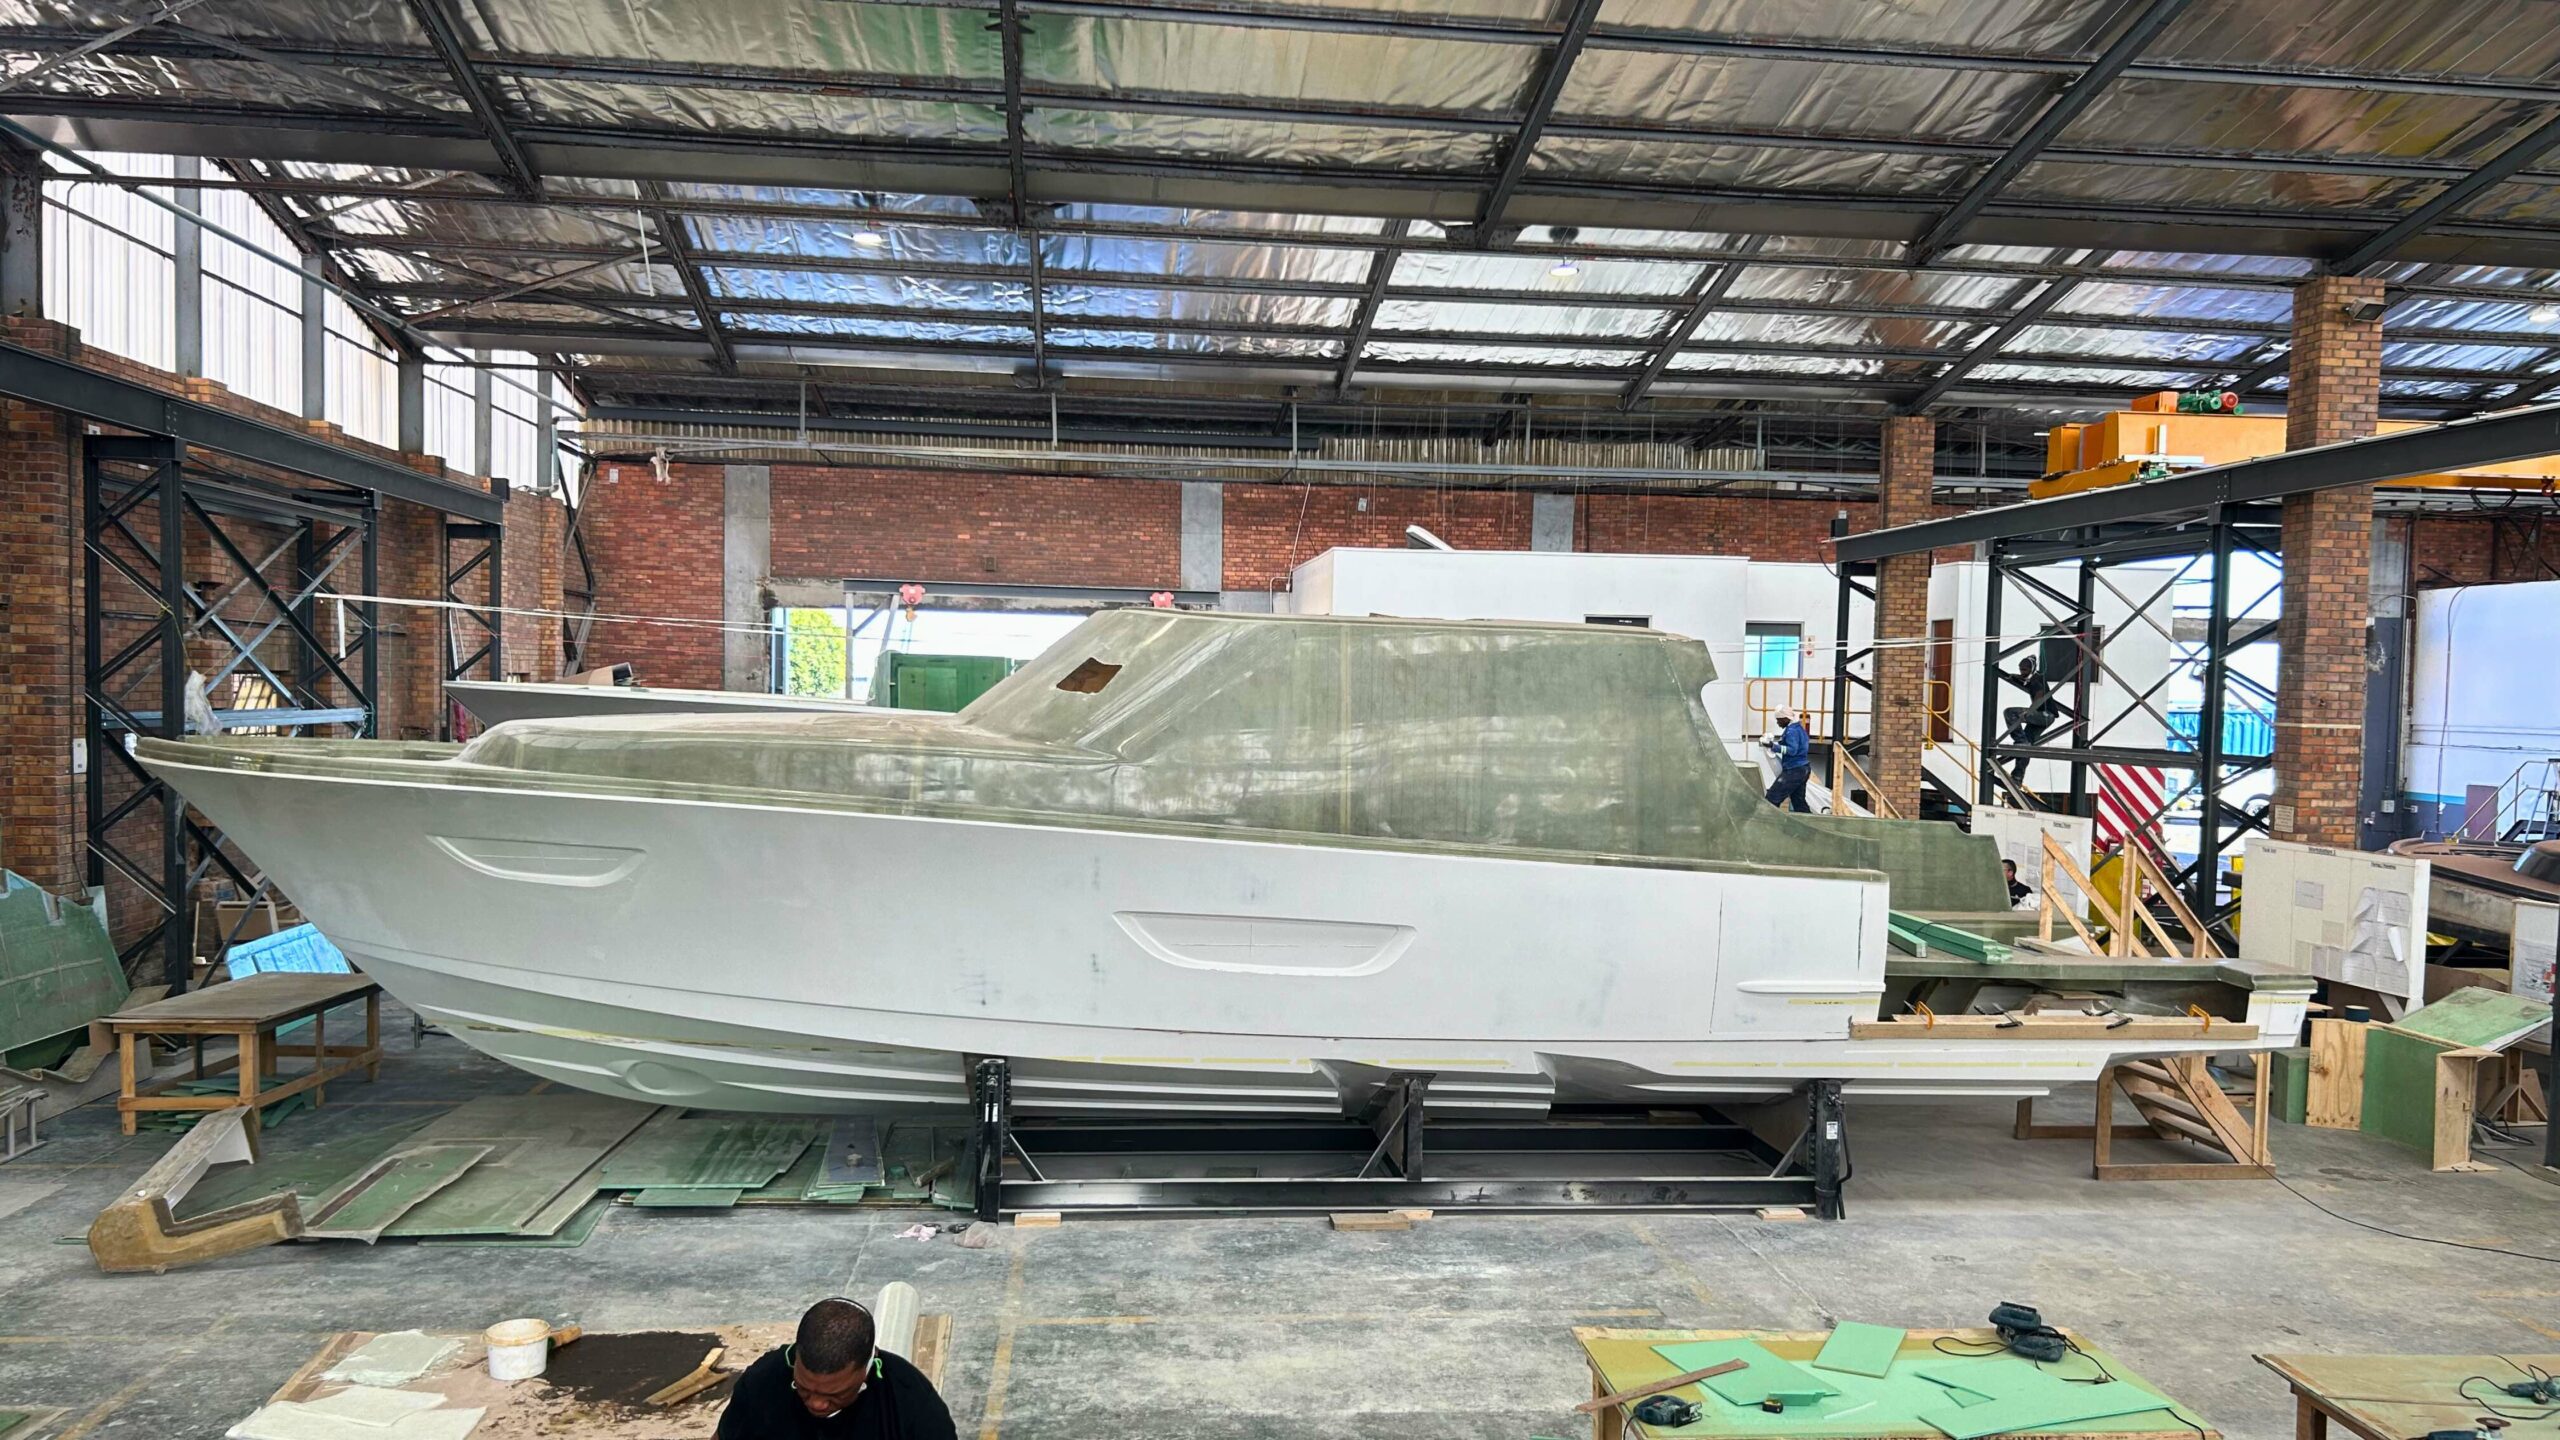 ECLIPSE Hull 1 in the factory with the Skinny scaled